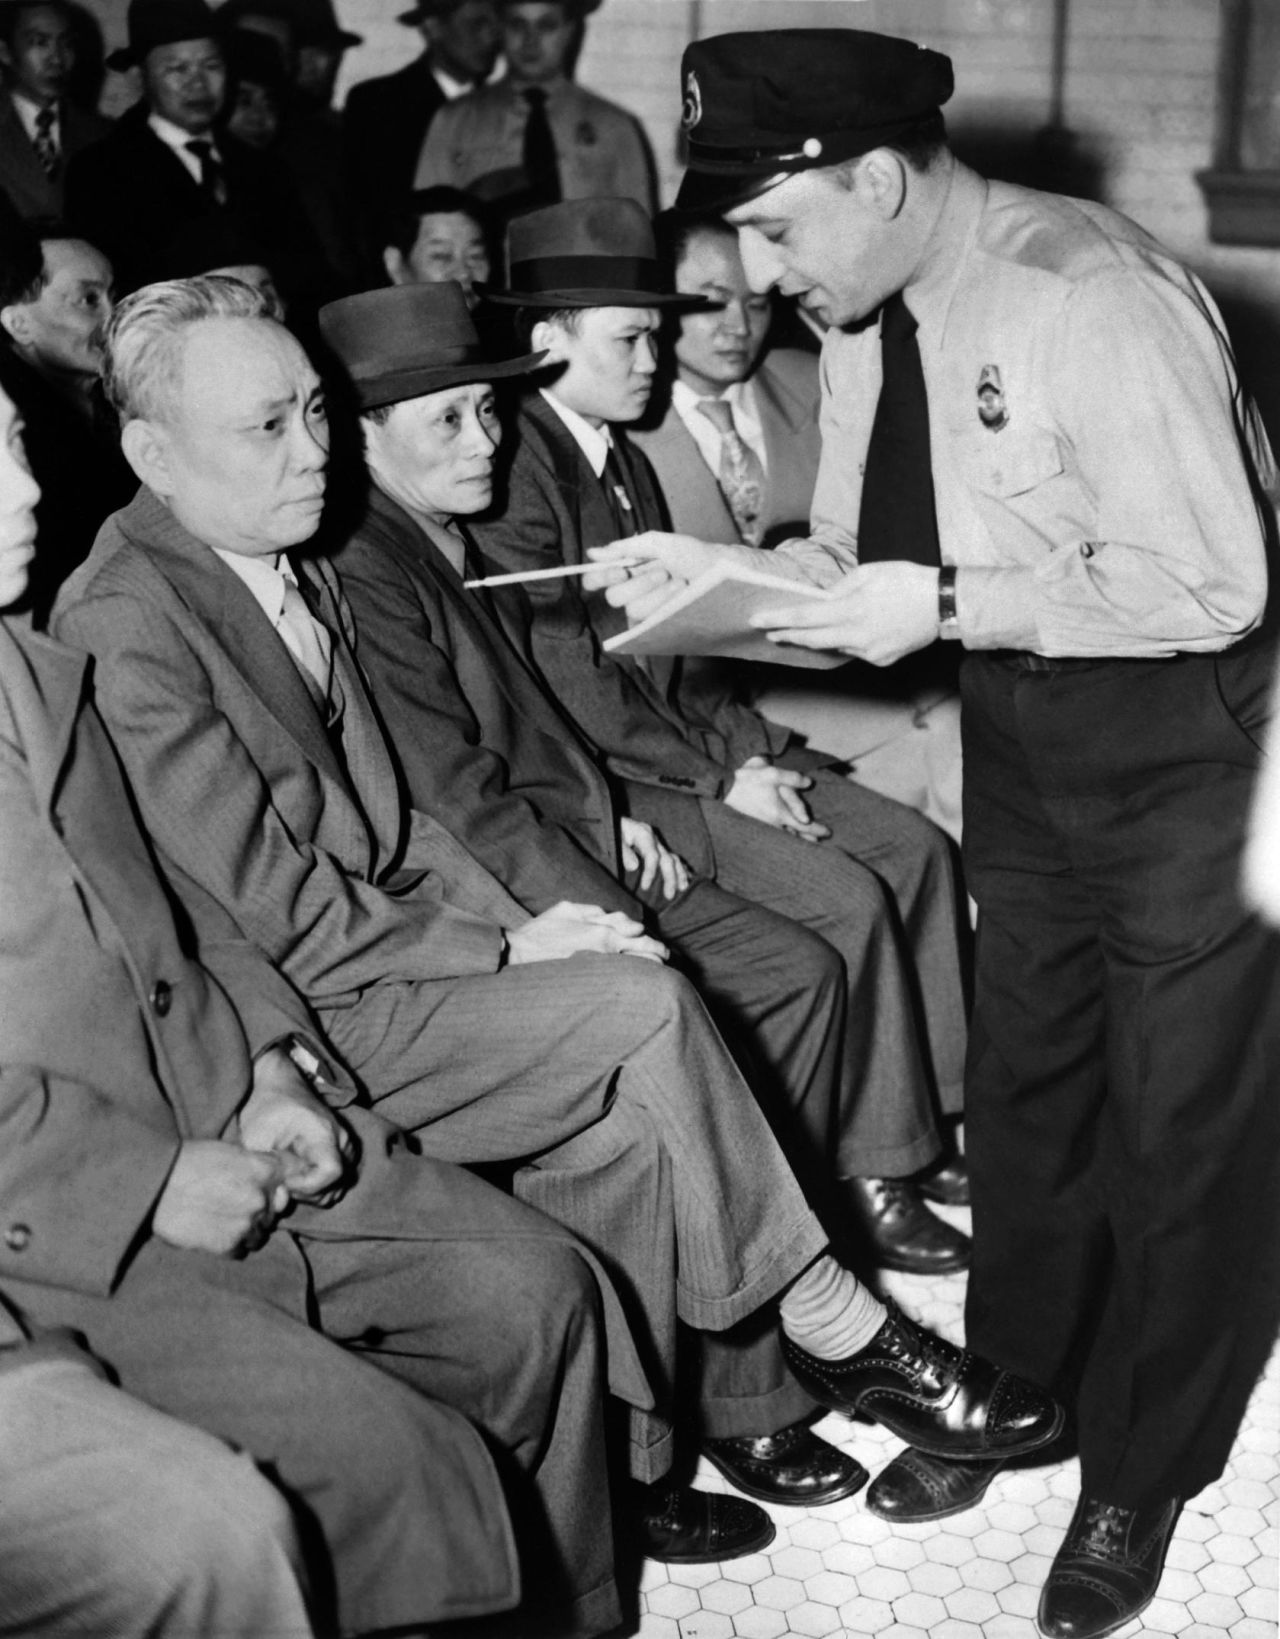 Asian men being interrogated by an immigration officer on February 2, 1951 in Brooklyn, New York.